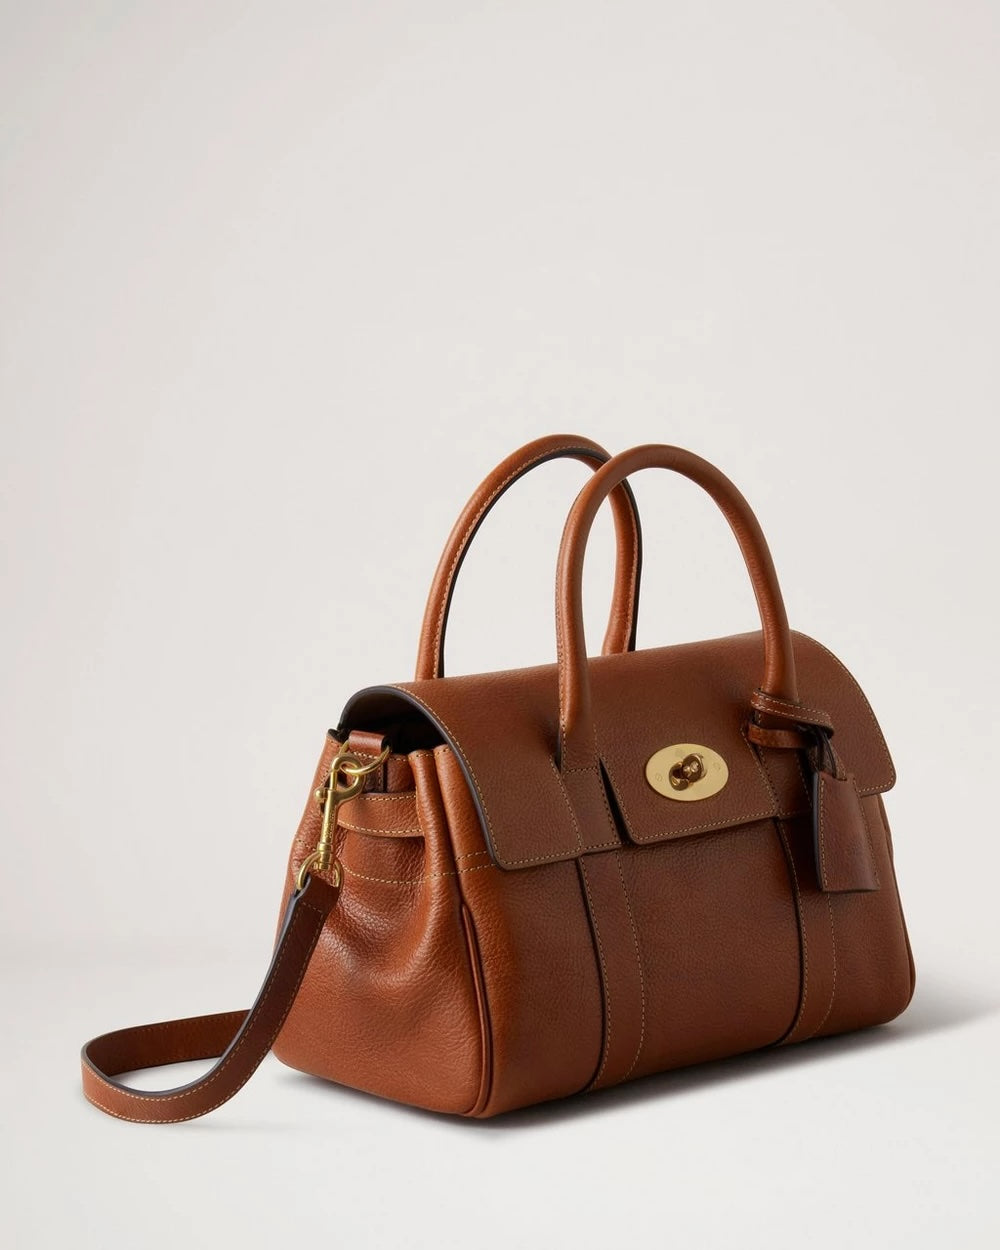 SMALL BAYSWATER SATCHEL